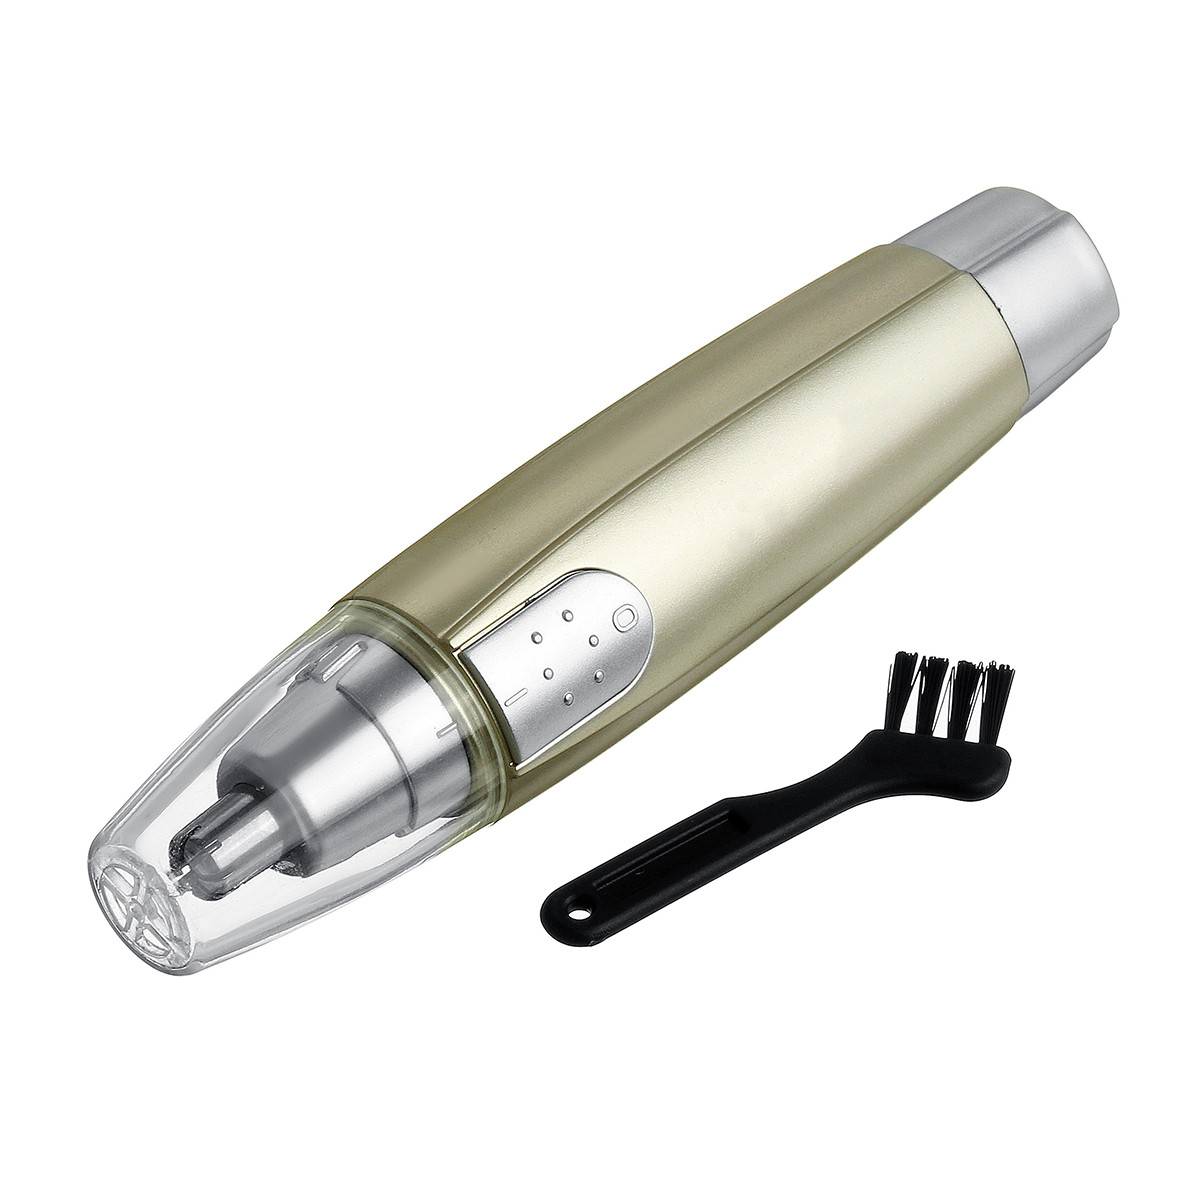 Personal-Trimmer-Nose-Hair-Ear-Eyebrow-Neck-Remover-Groomer-Micro-Shaver-Touch-1606035-9